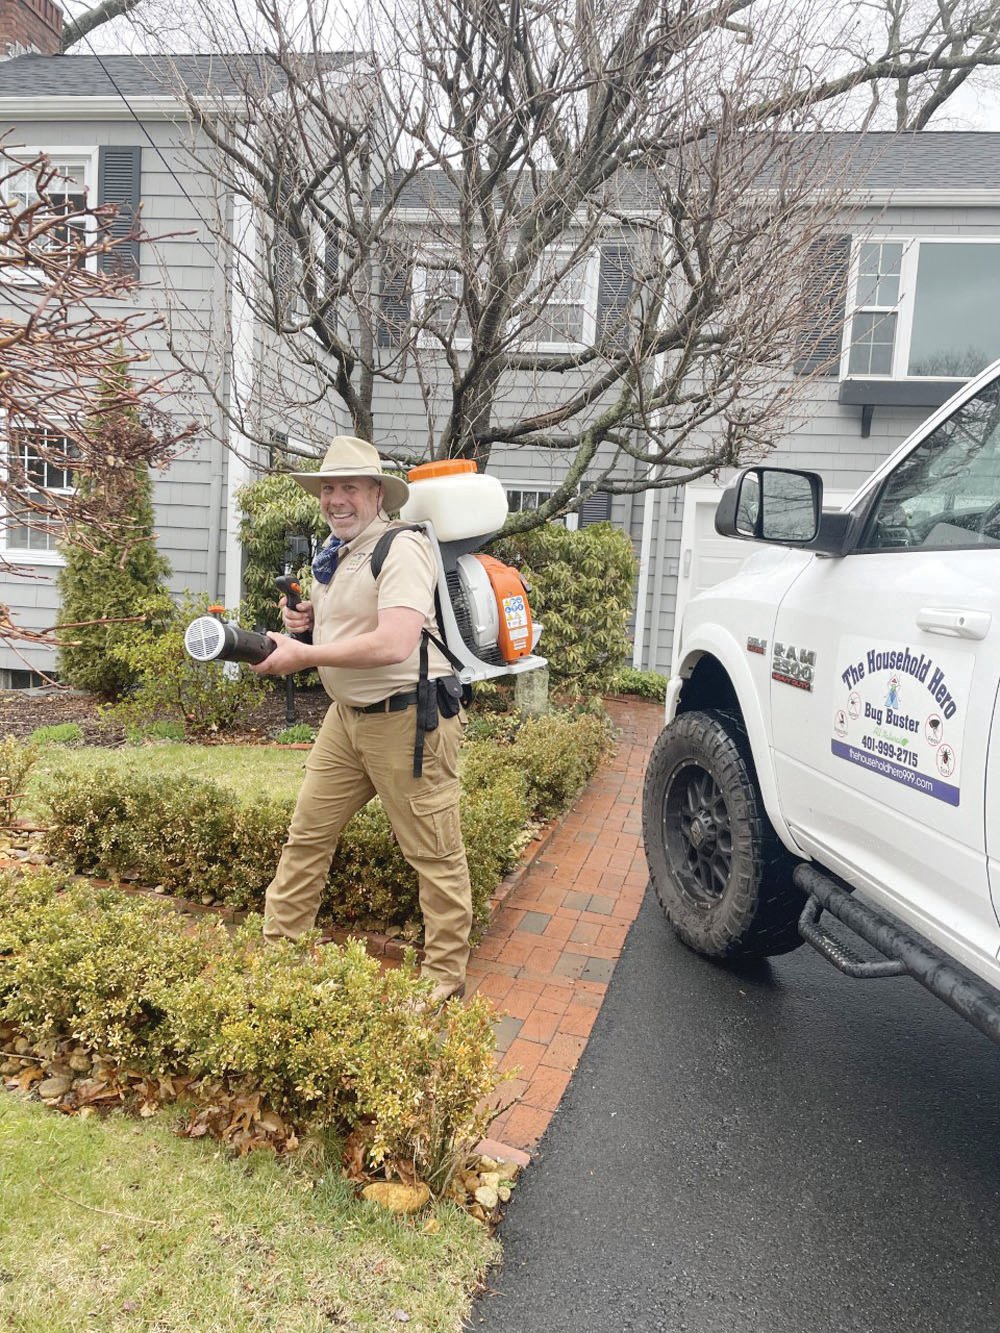 Meet the official “Bug Buster” and all-around Handyman, Stephen “Gus” Gustafson. He will come to you to rid your home of pesky insects and will do almost any project you need done around the house!